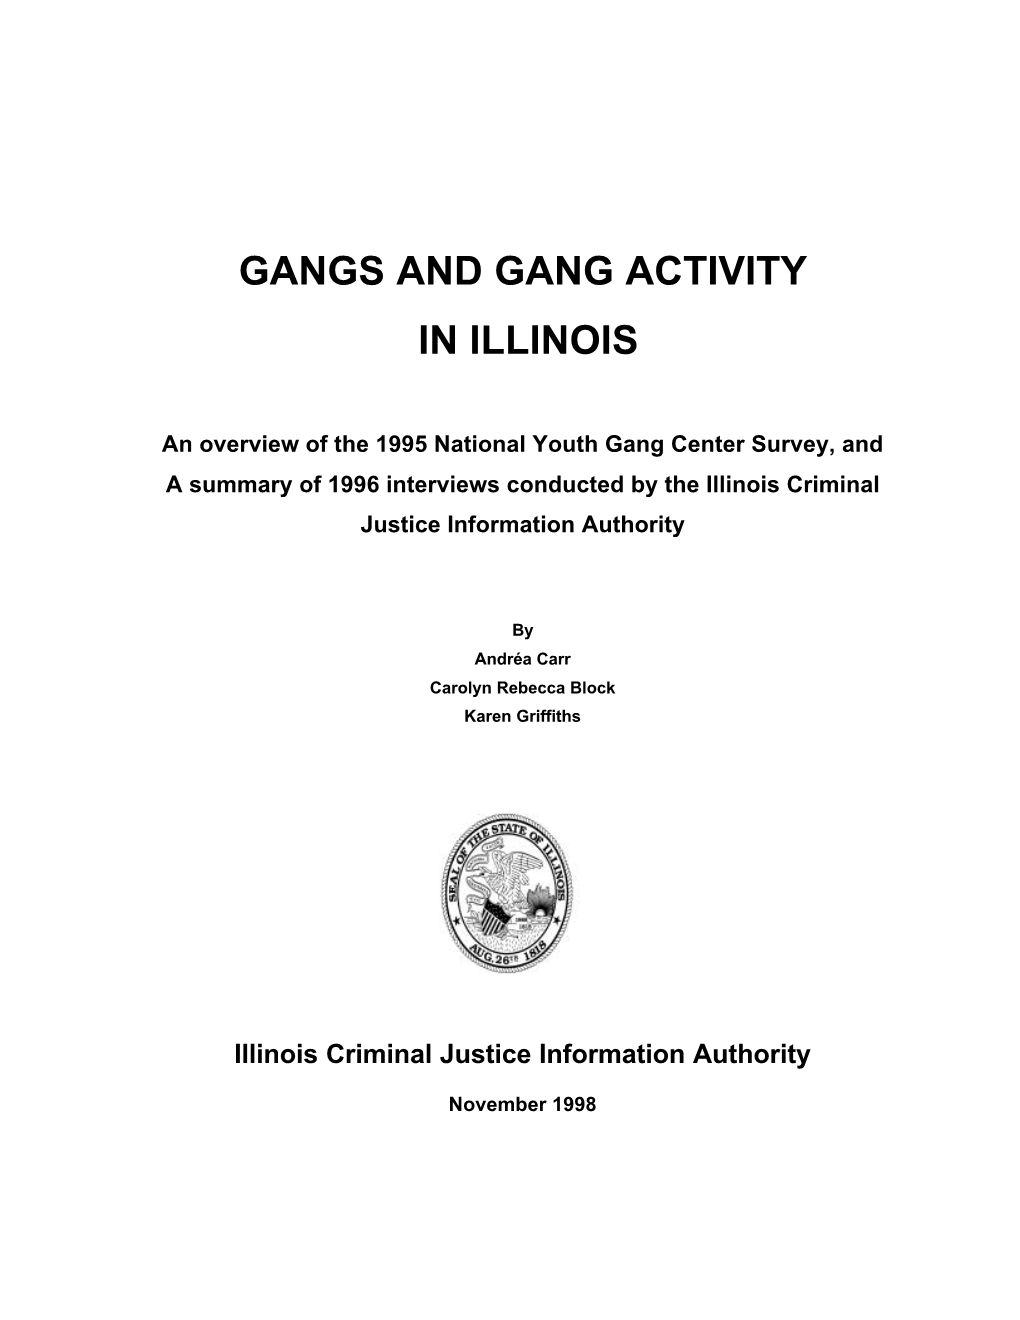 Gangs and Gang Activity in Illinois